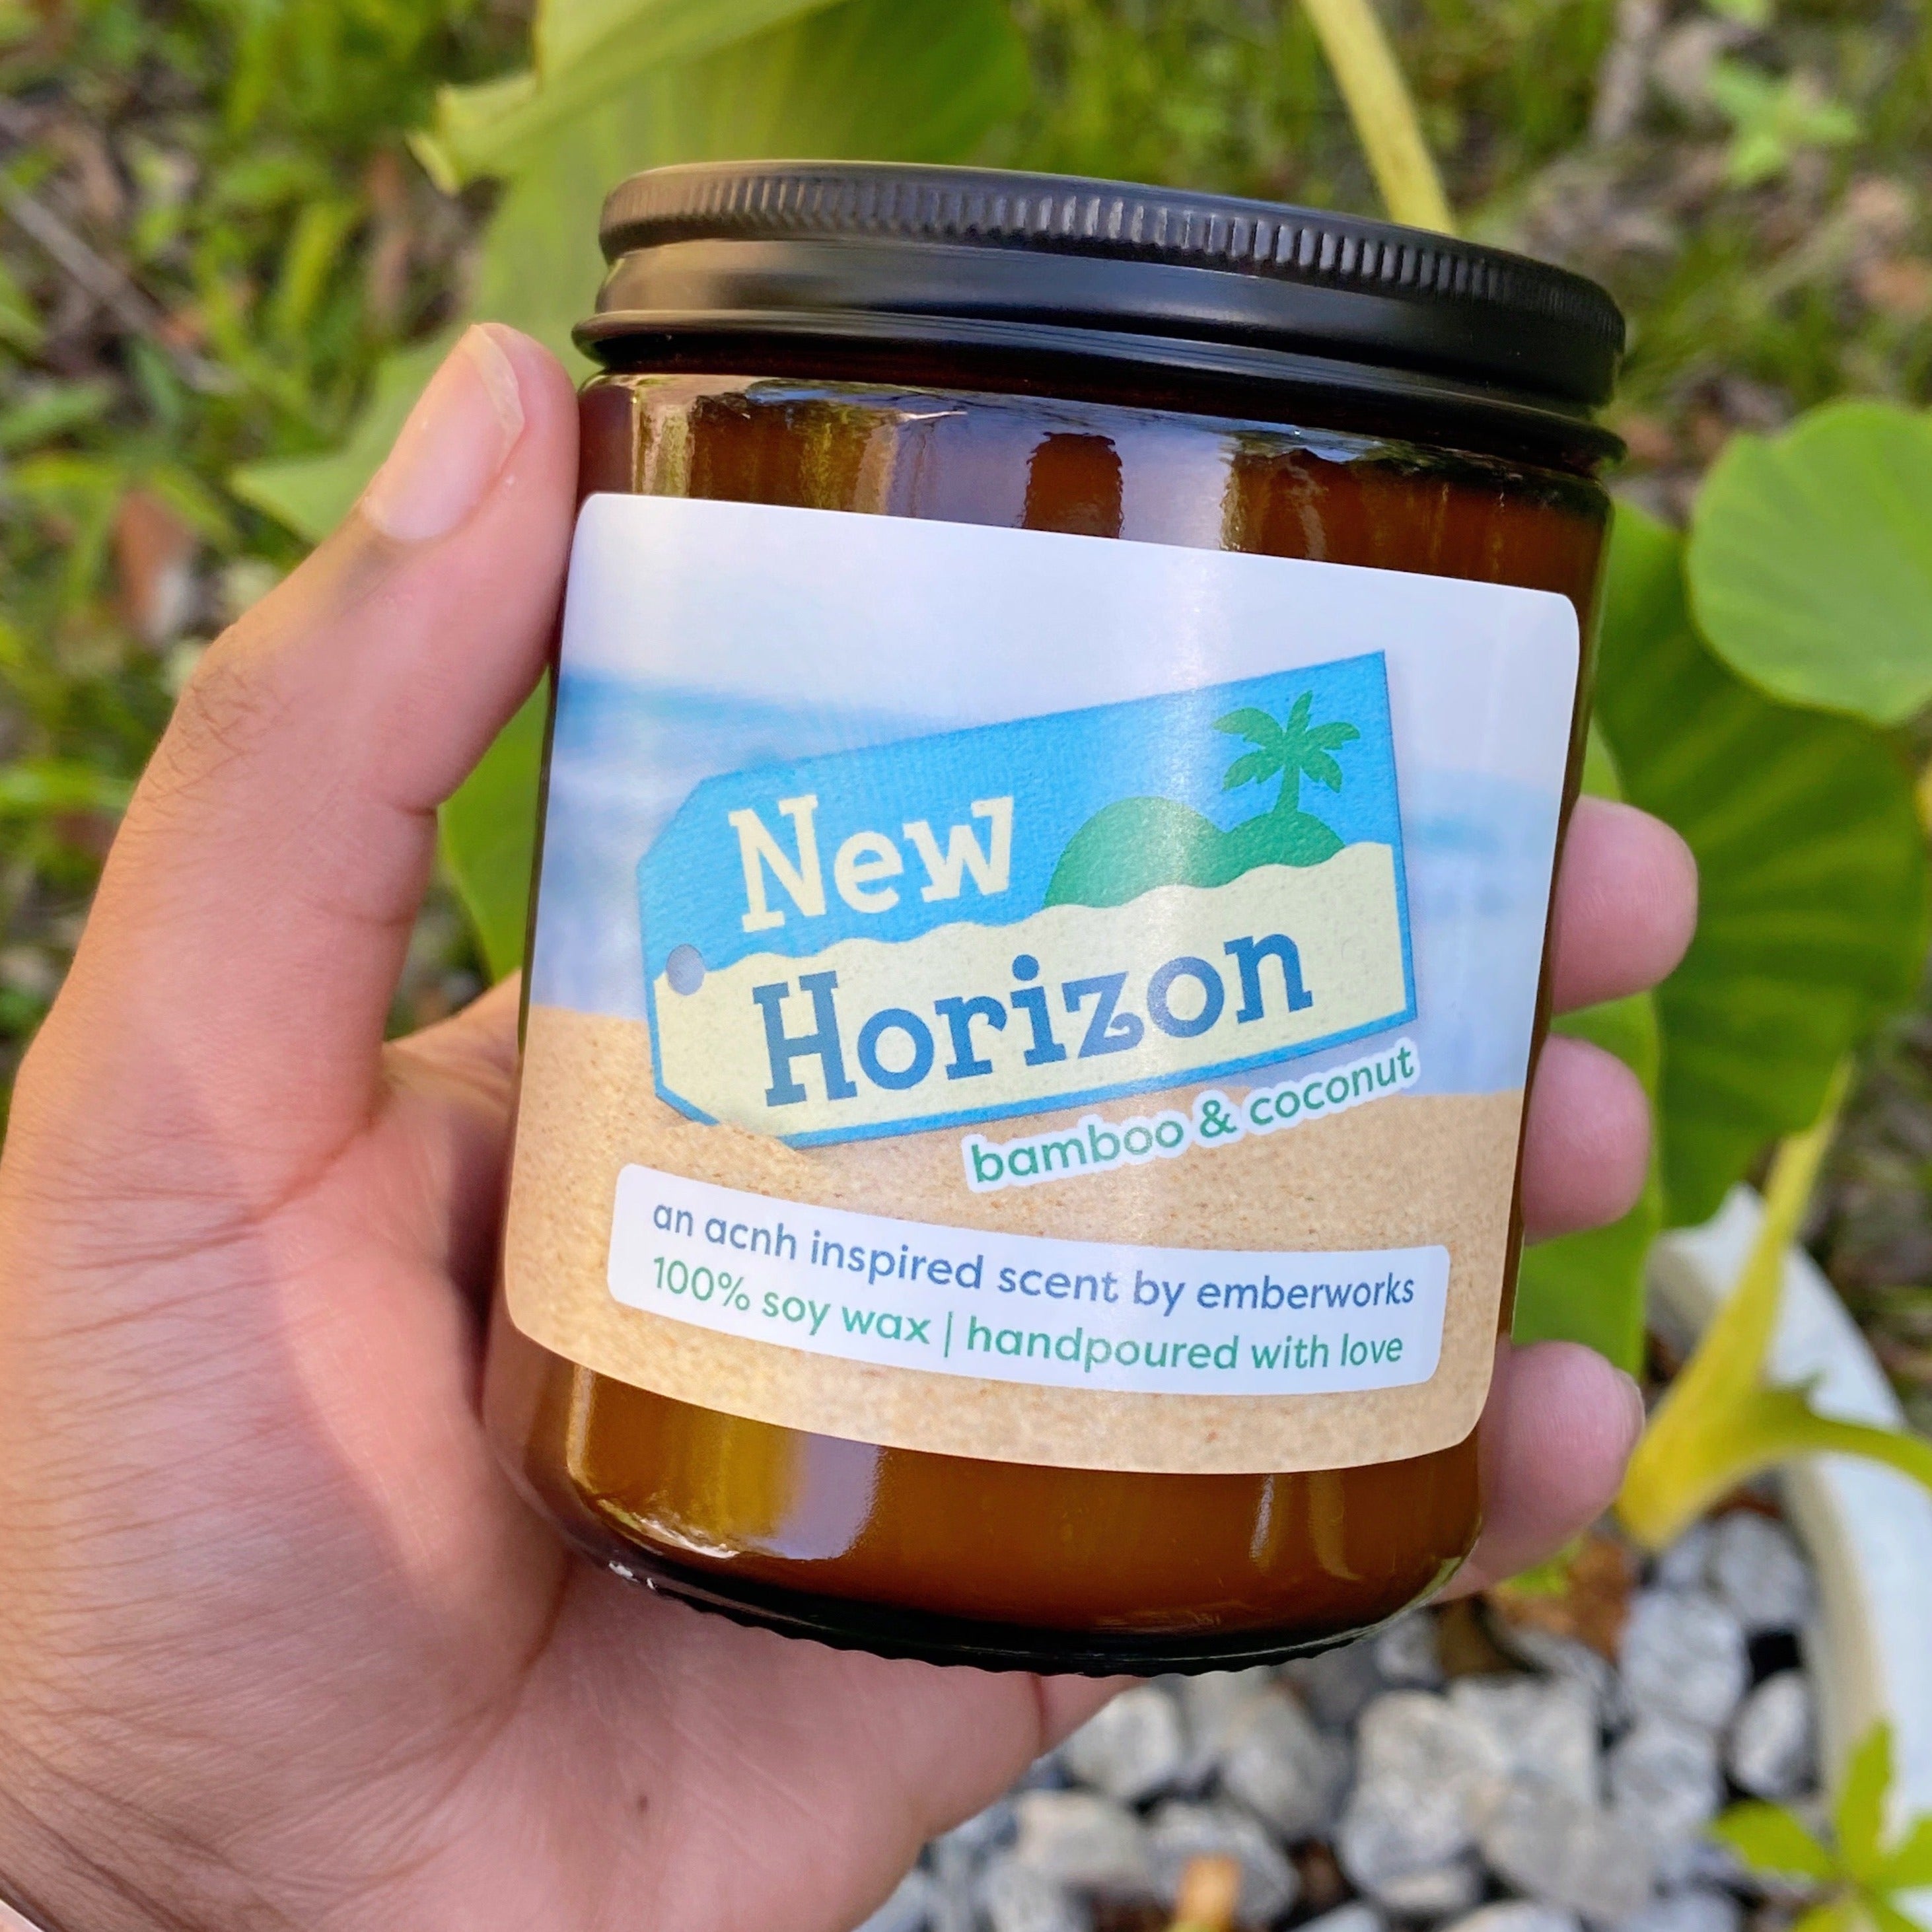 New Horizon - A ACNH Inspired Scent